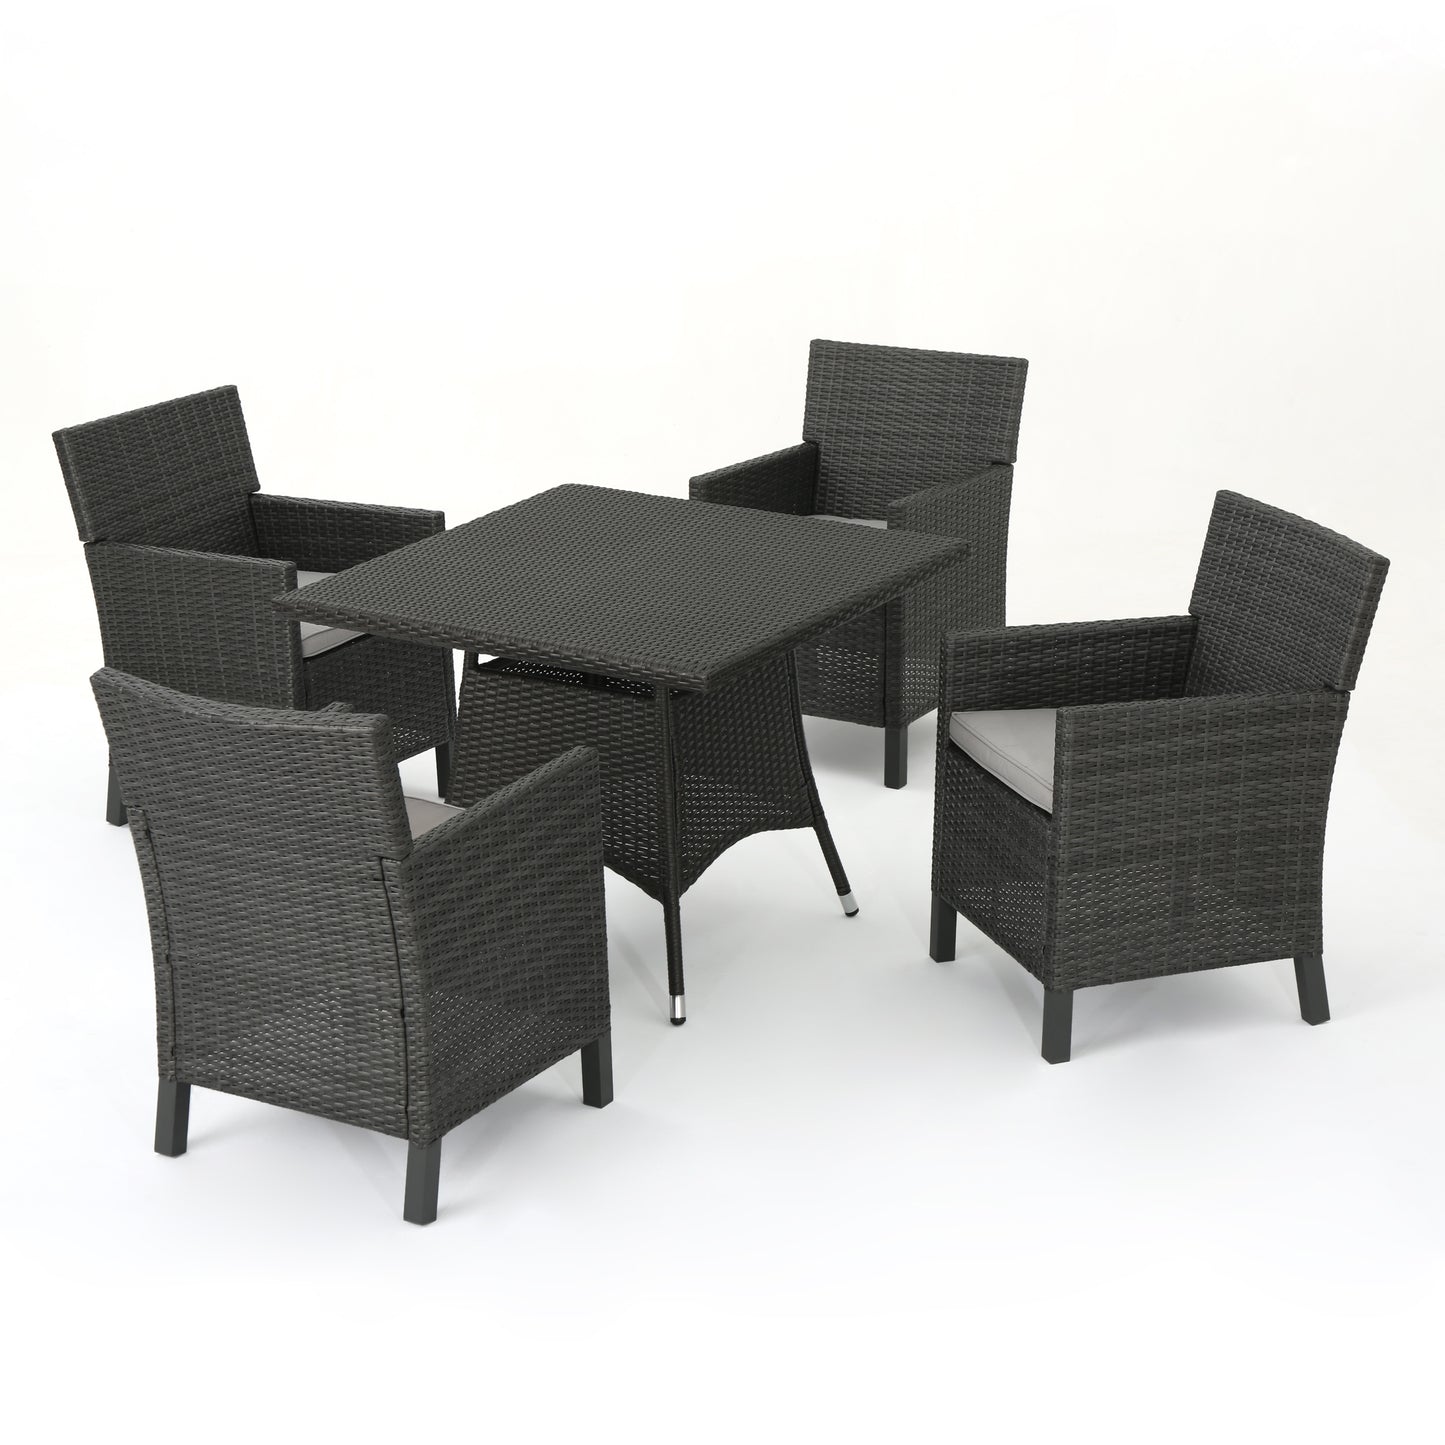 Cyril Outdoor 5 Piece Wicker Square Dining Set with Water Resistant Cushions